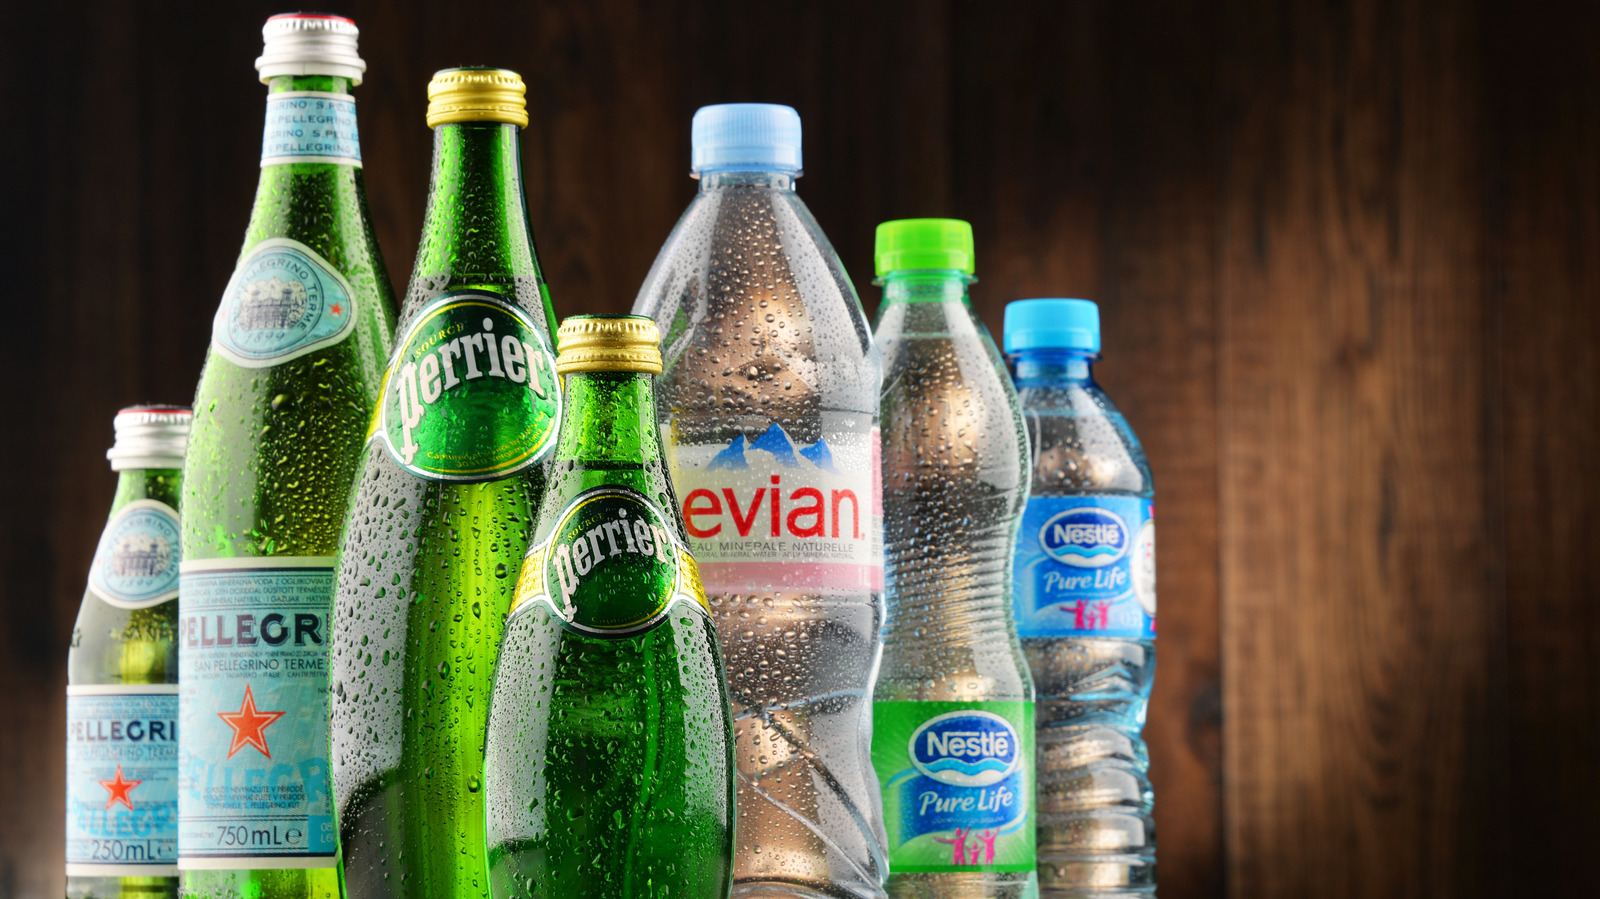 https://www.thedailymeal.com/img/gallery/why-some-bottled-water-brands-are-so-expensive/l-intro-1681131630.jpg